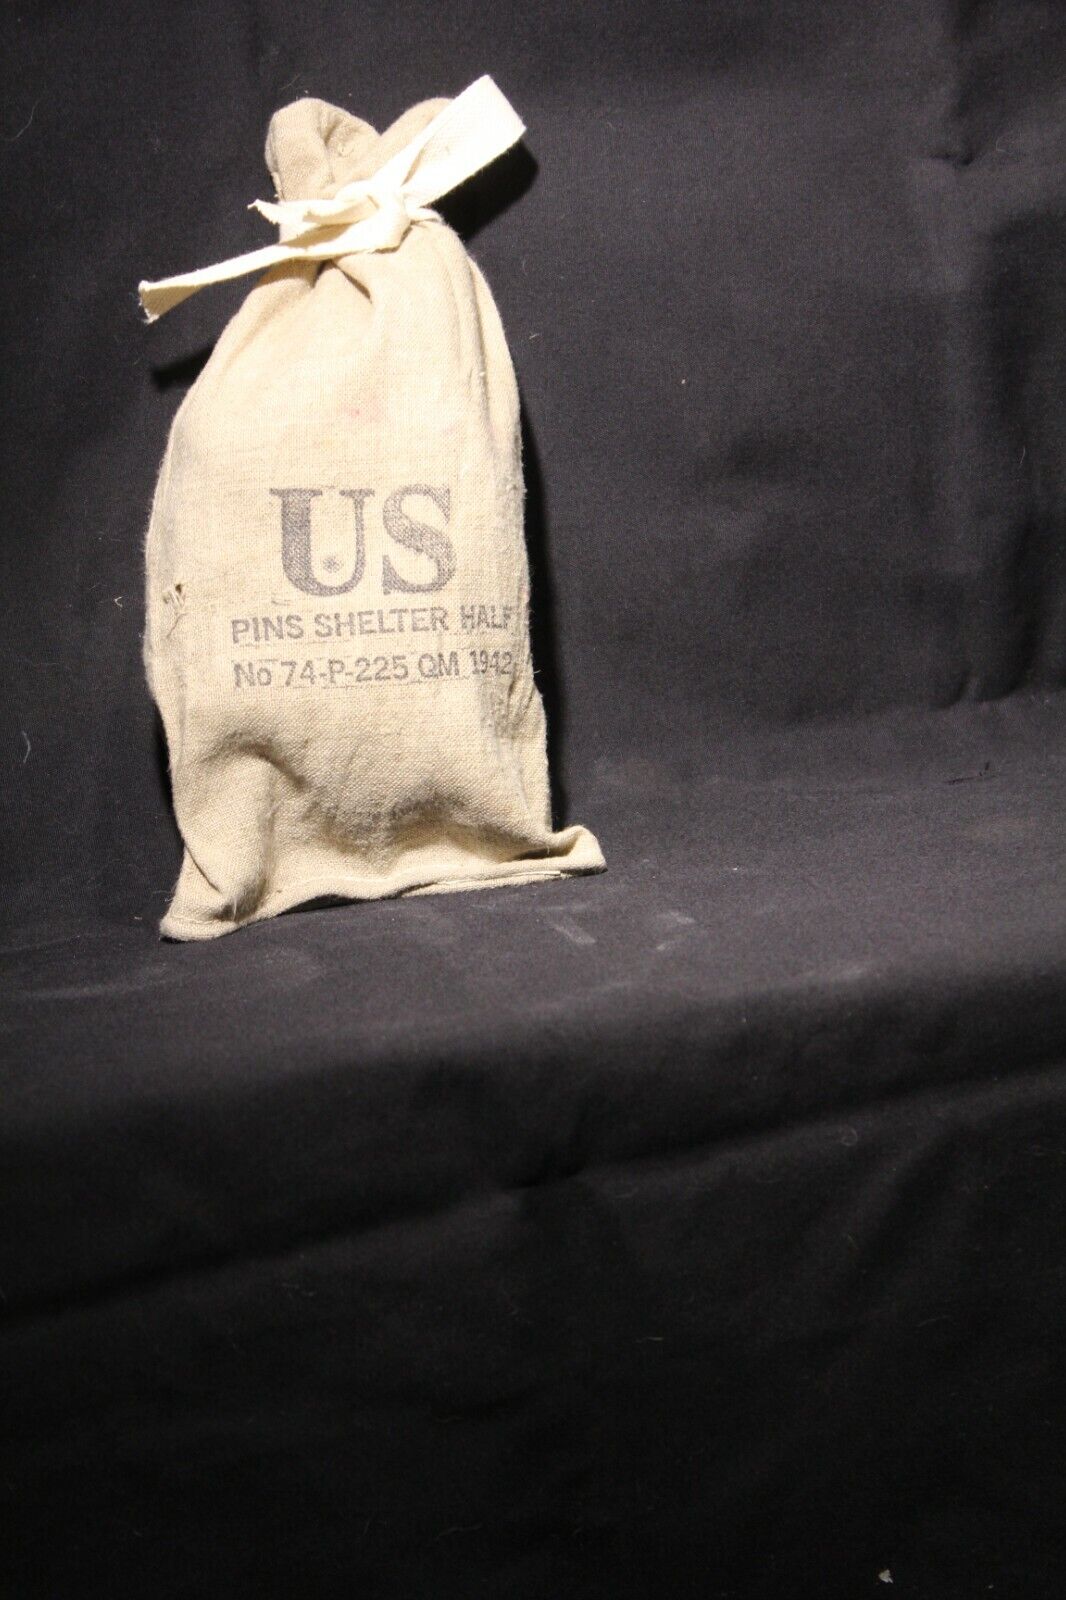 WWII 1942 GI Shelter Half Pin Bag-used for candylettersTools-veryclean-FREE SHIP